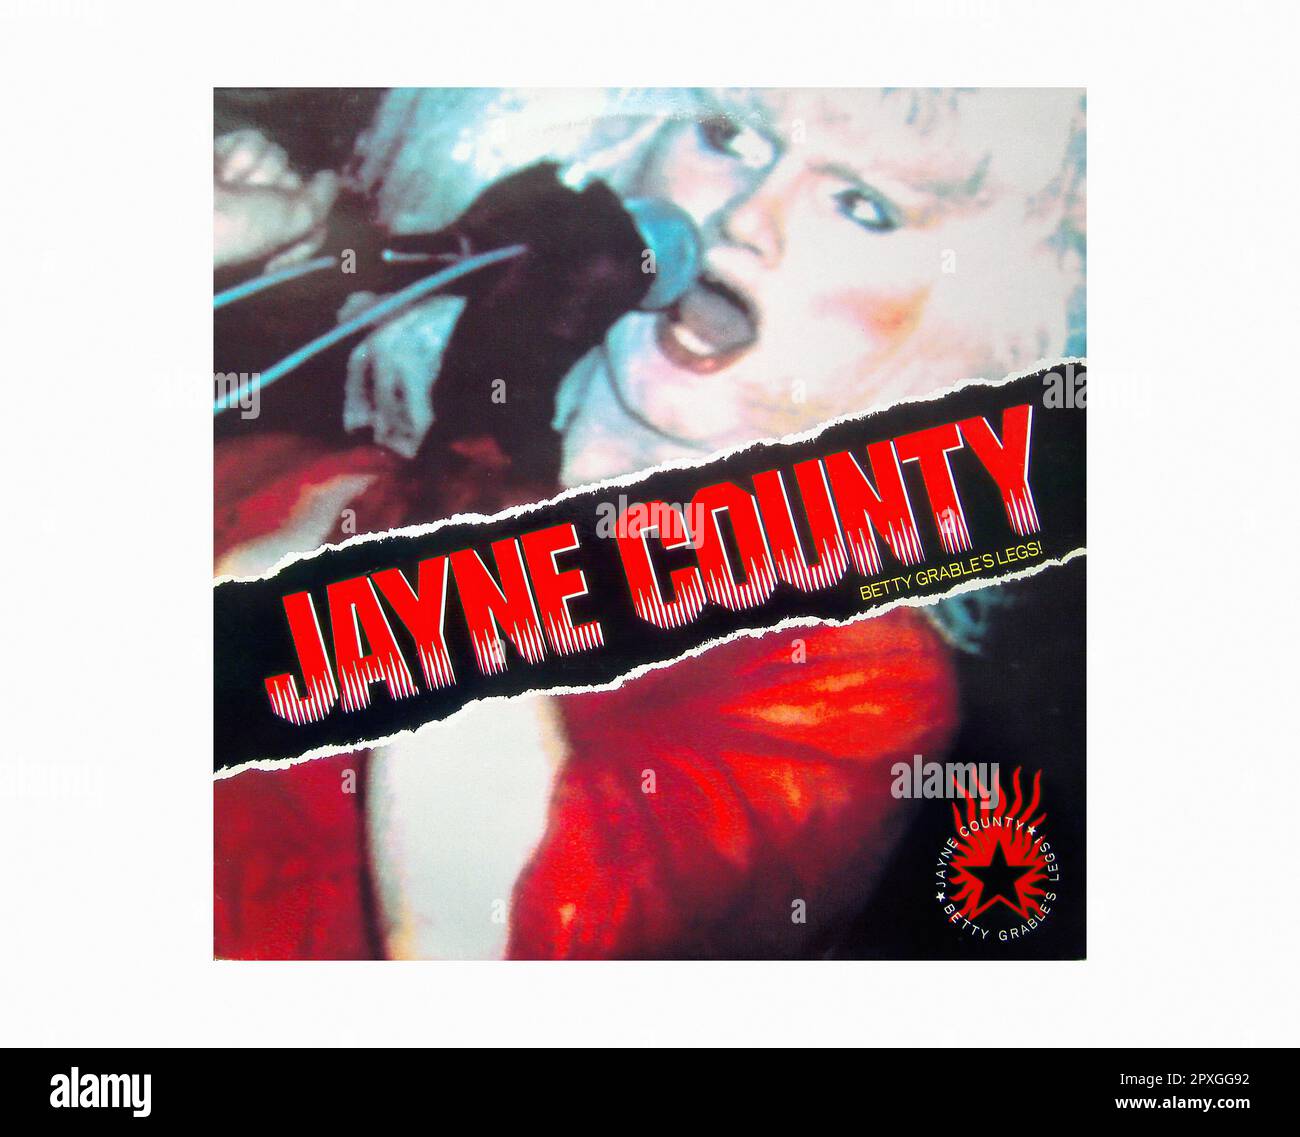 Jayne County - Betty Grable's legs [1989] 00002 - Vintage Vinyl Record Sleeve Banque D'Images